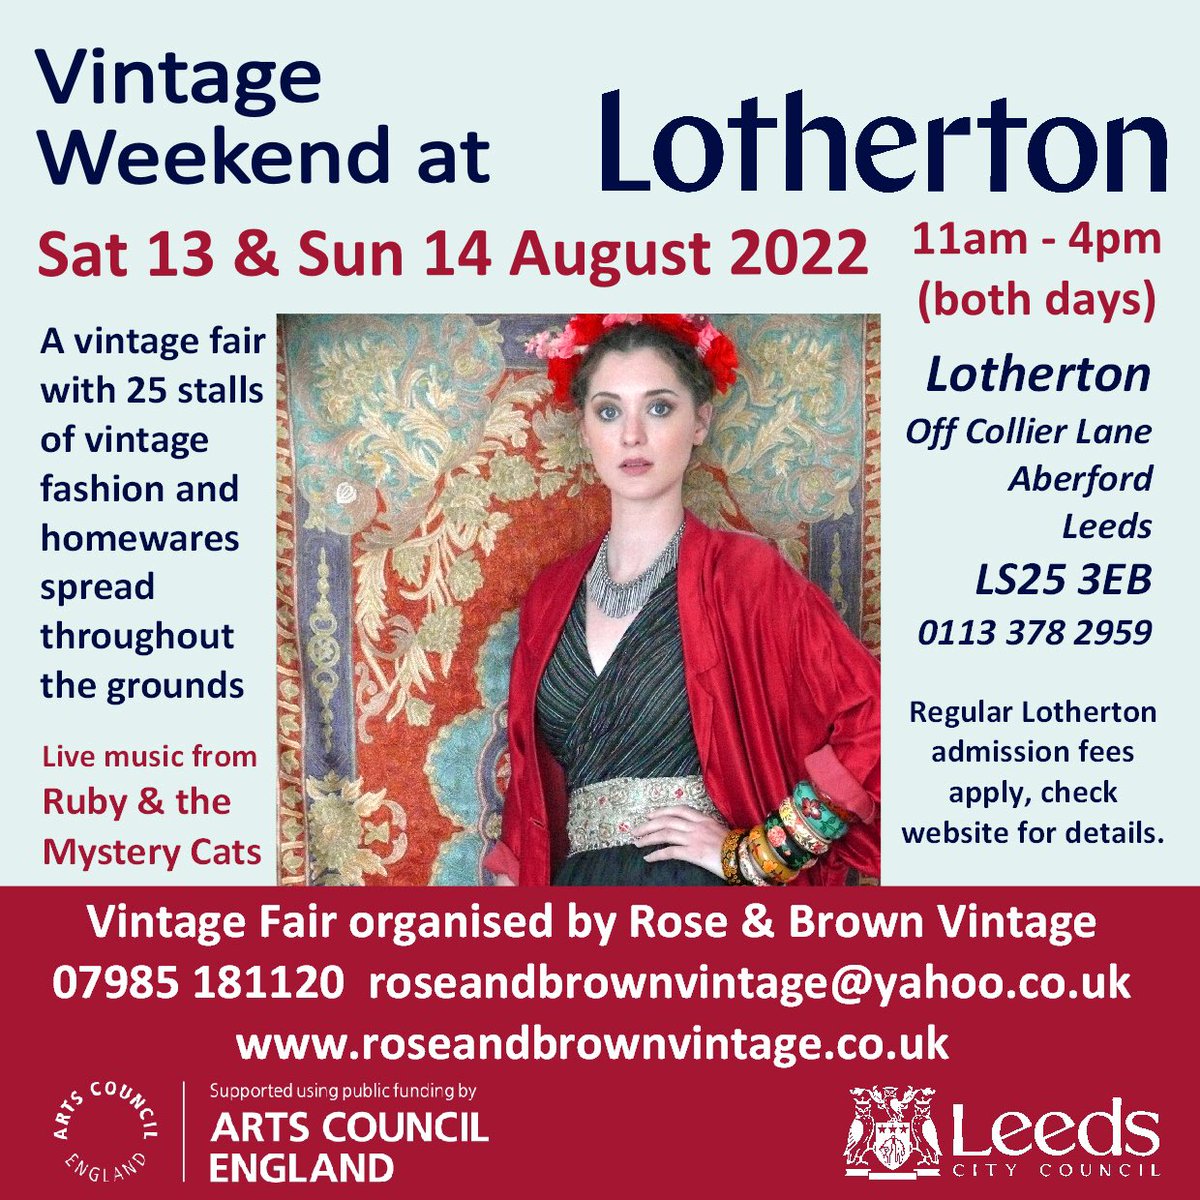 Join us for @RoseandBrown #vintageweekend at @LothertonHall Saturday and Sunday 11 - 4